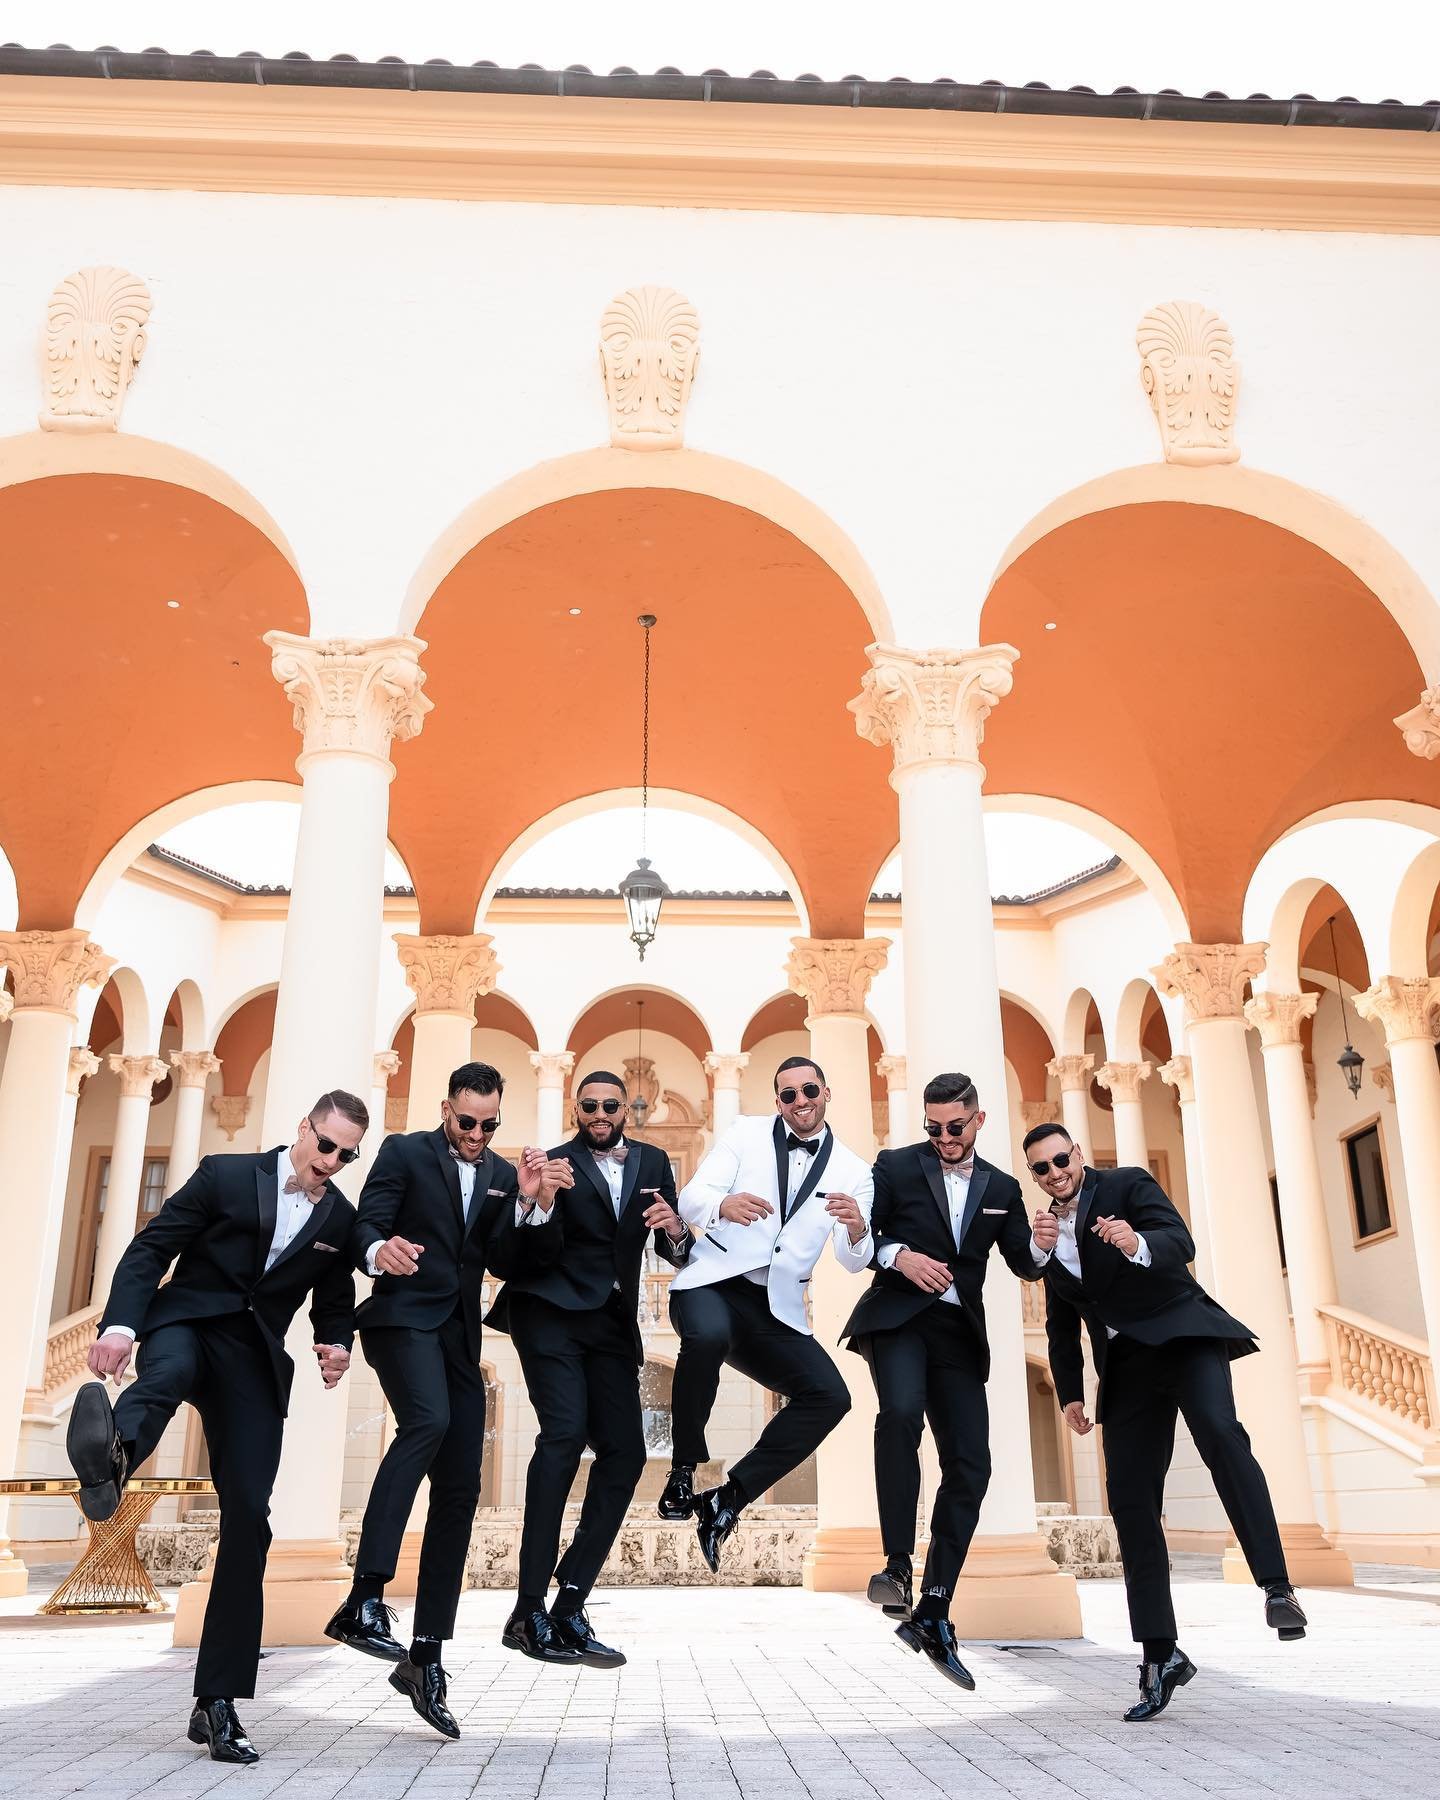 Crafting unforgettable moments for the groom and his squad.  #groomedtoperfection #weddingmagic #groom #groomsmen ⠀
__________ ⠀
Credits: ⠀
Wedding Planner: @gc.eventsmiami ⠀
Getting Ready Venue: @thebiltmoremiami @biltmoreweddingsmiami ⠀
Photography